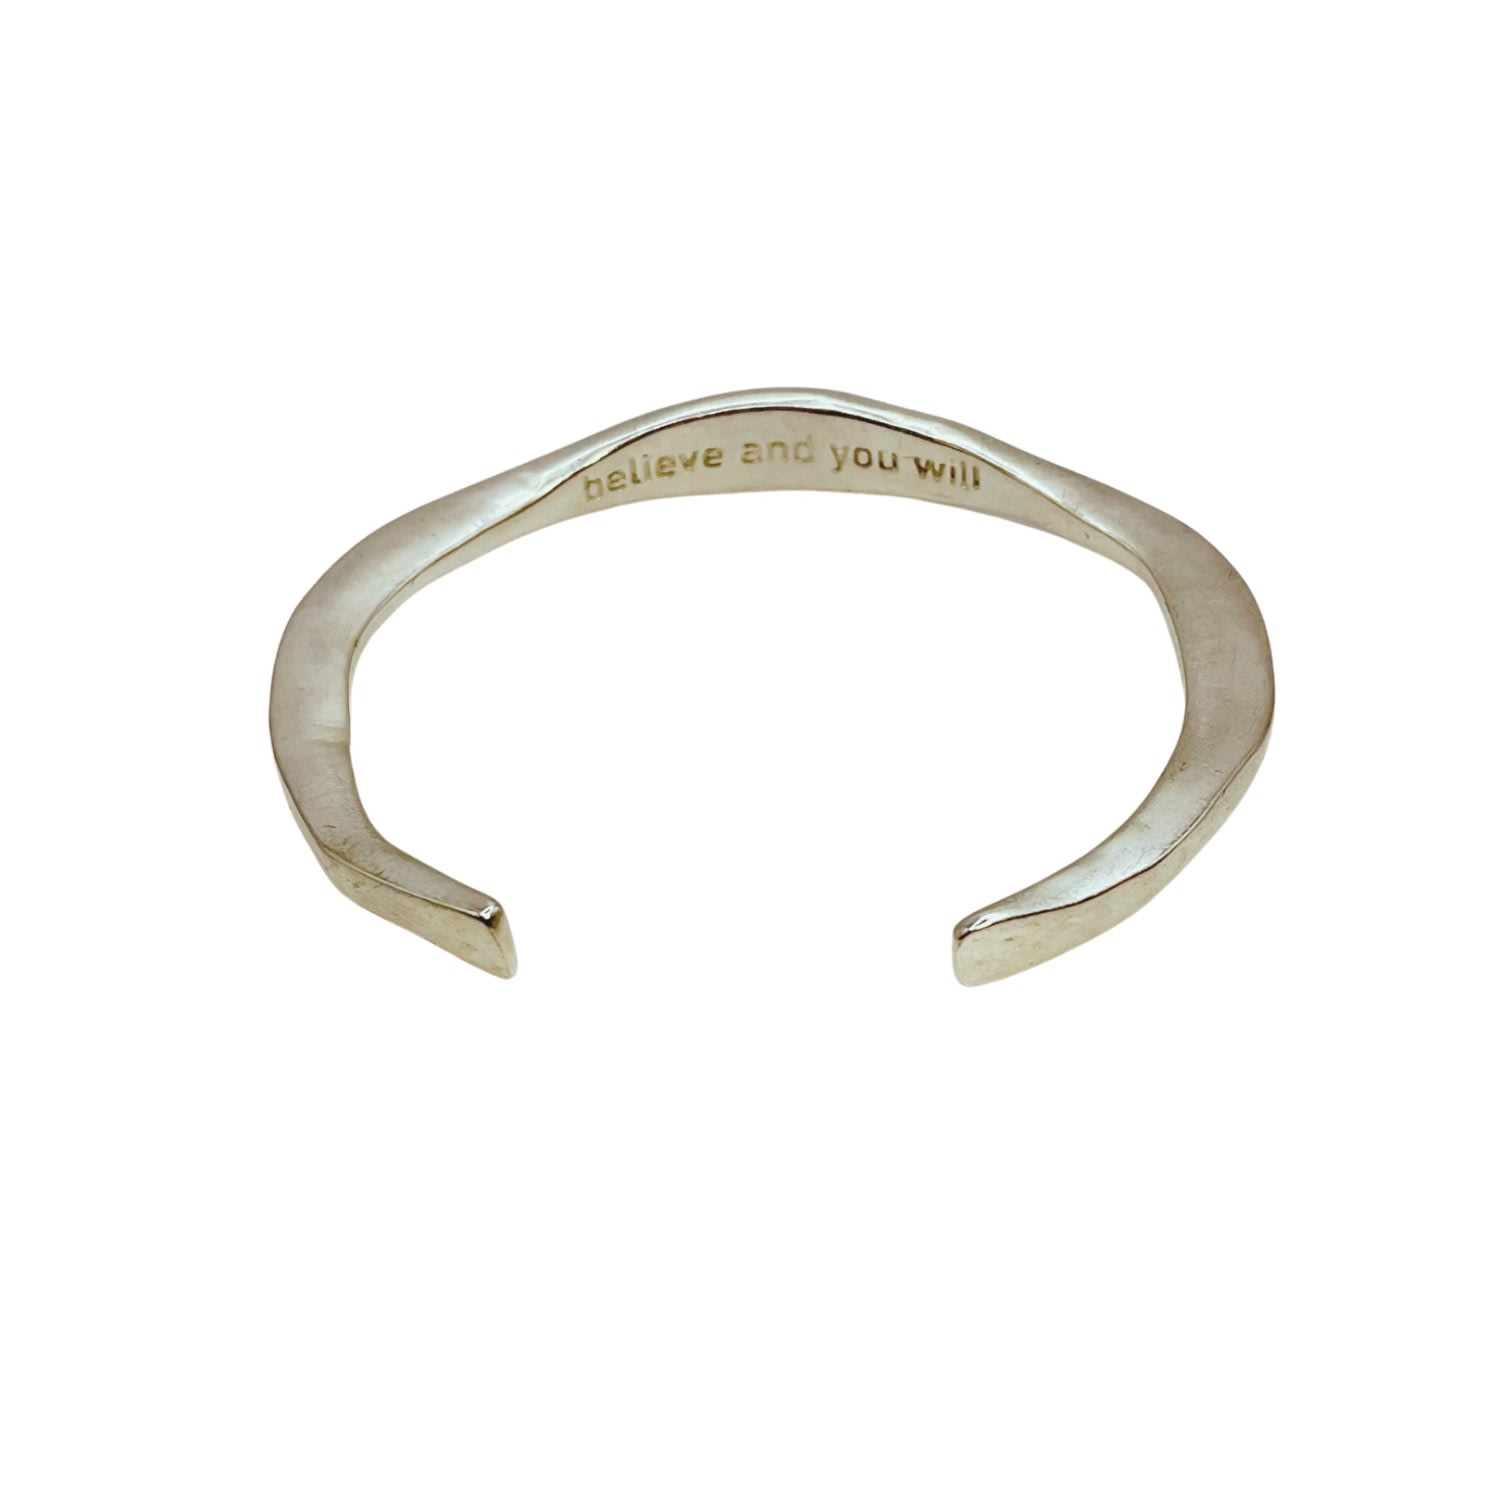 Women’s Silver Mantra Cuff, Inscribed Amy Delson Jewelry